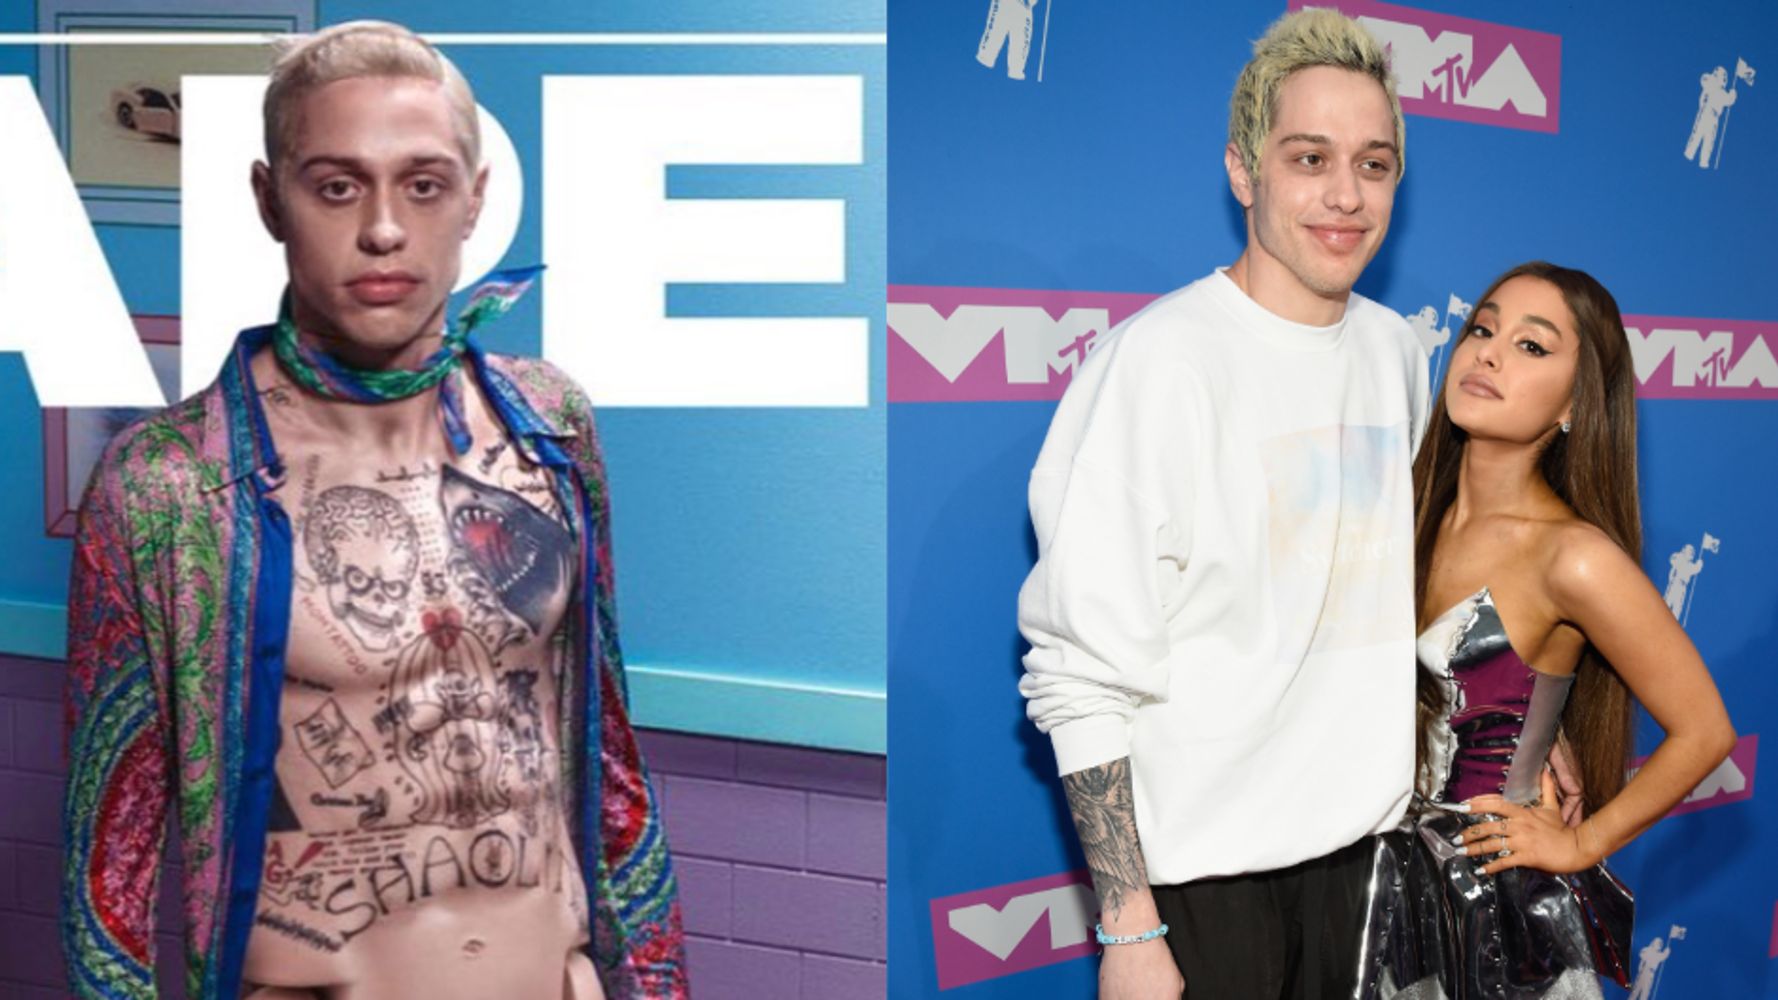 A Crotchless Pete Davidson Has One Last Thing To Say To Ariana Grande.